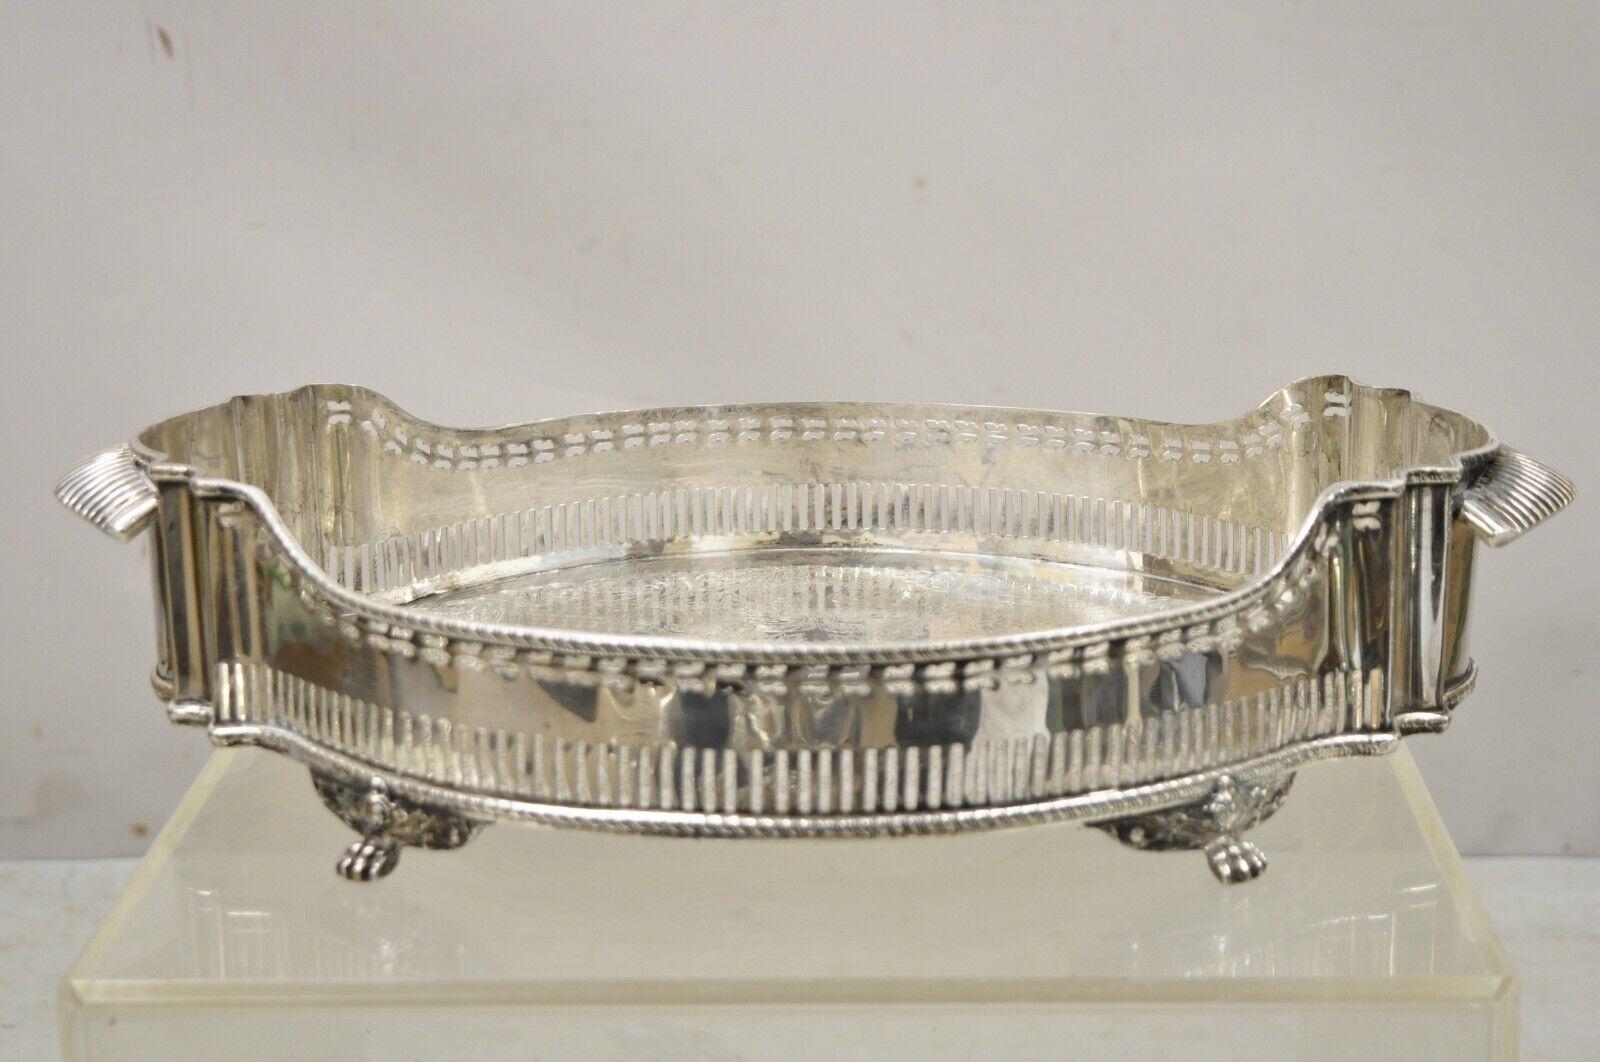 Vintage Silver Plated Shapely Serving Platter Tray with Pierced Gallery on Paw Feet. Item features a nice deep form, attractive shapely design, pierced gallery, etched scrollwork design to center, raised on paw feet, unmarked, very nice vintage